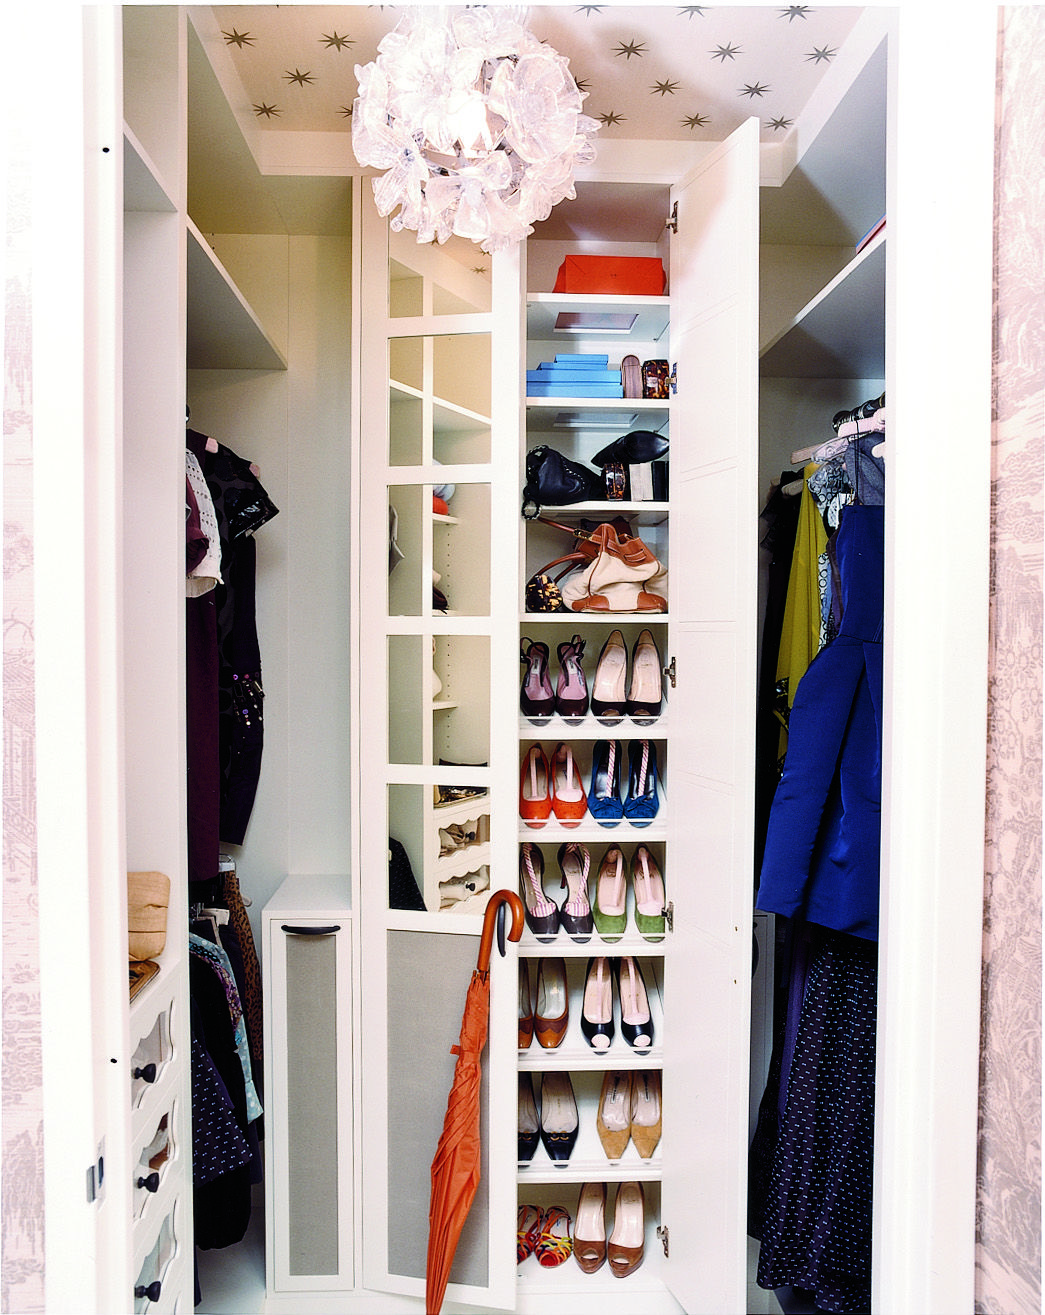 21 Dressing Room Ideas to Make Your Life More Glamorous